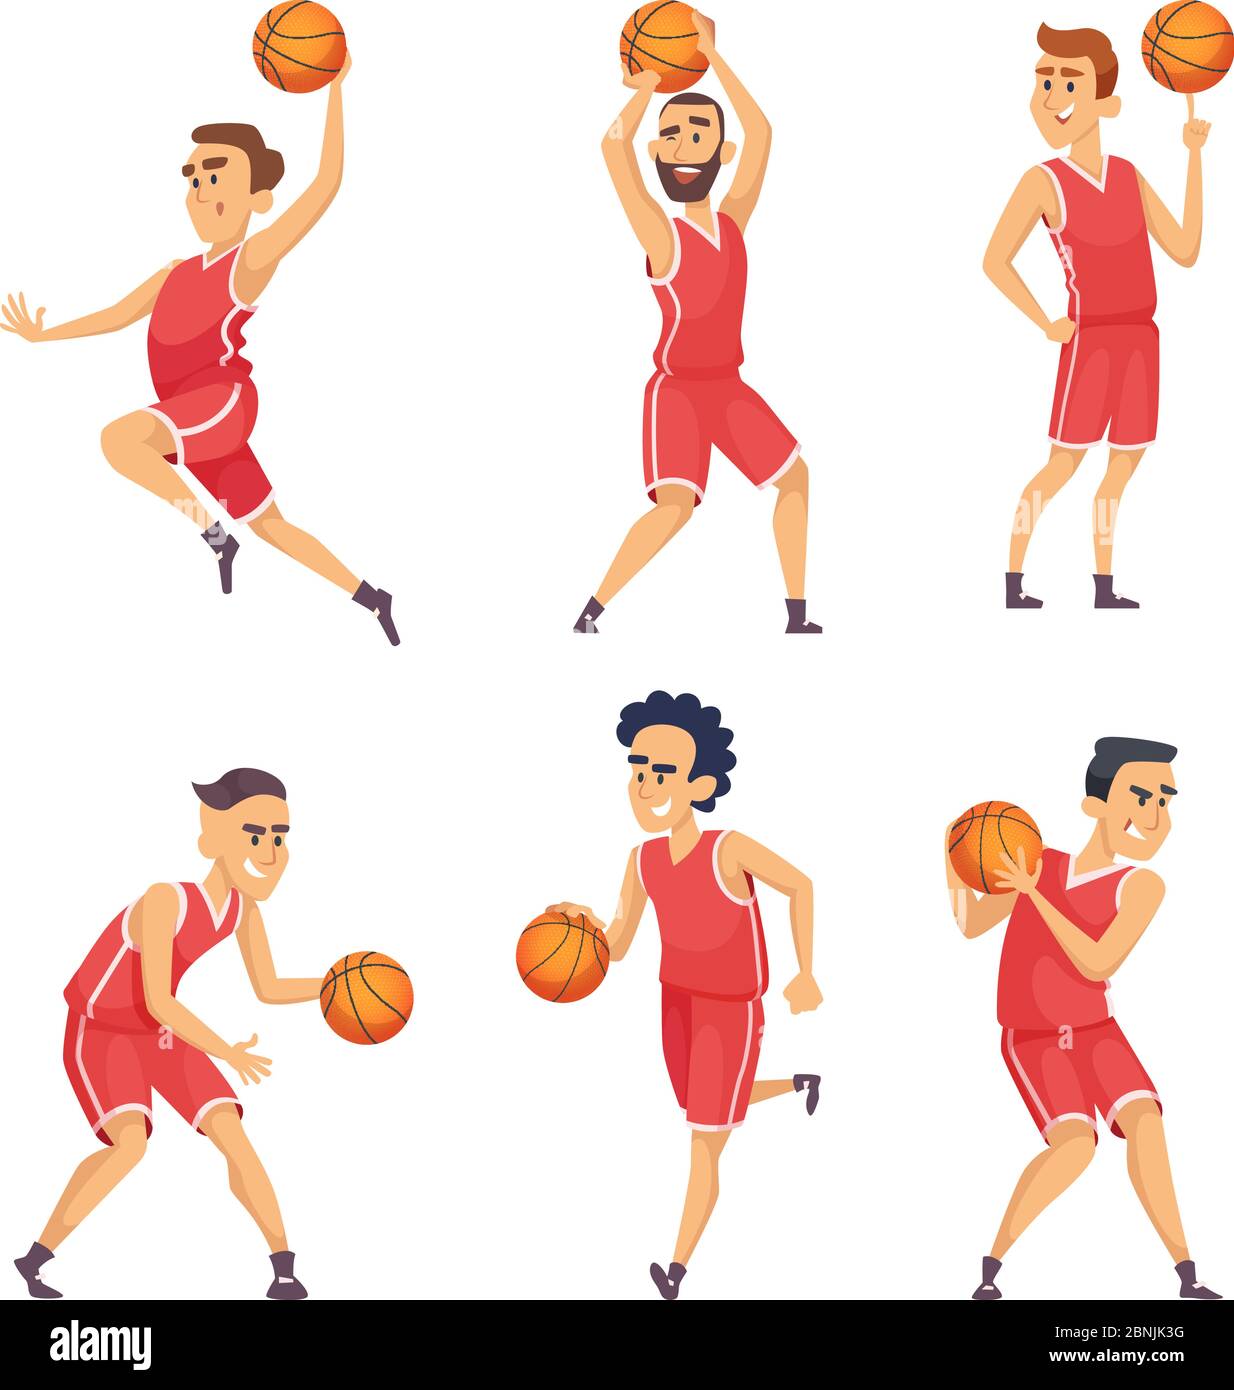 Sport illustrations. Characters set of basketball team Stock Vector